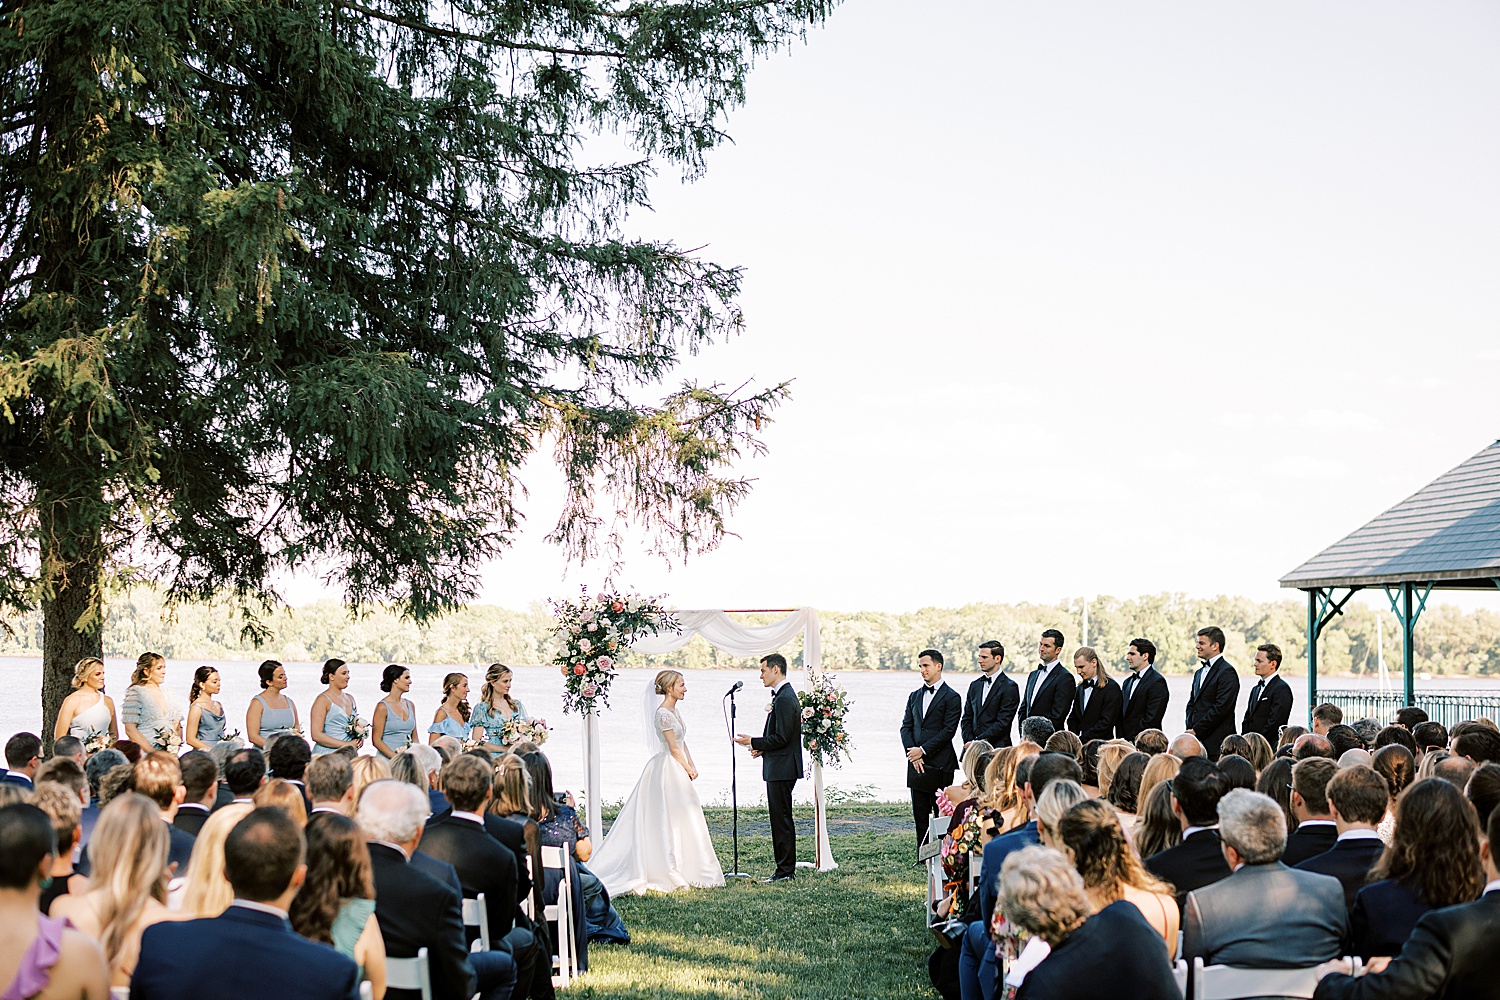 waterfront wedding ceremony in the garden at Glen Foerd on the Delaware